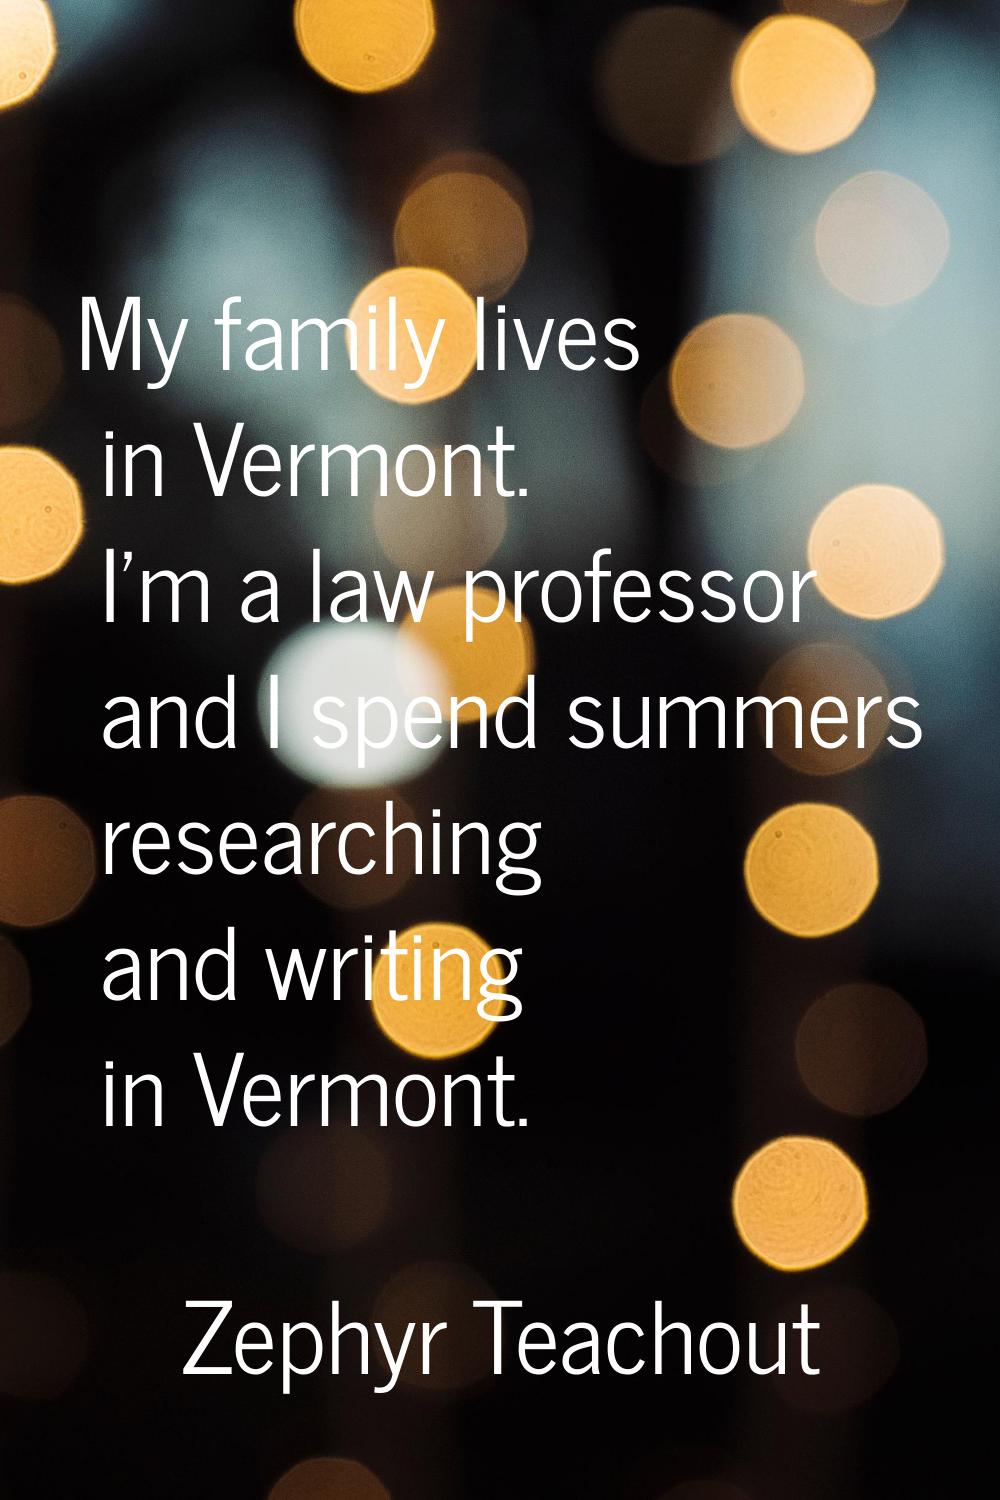 My family lives in Vermont. I'm a law professor and I spend summers researching and writing in Verm